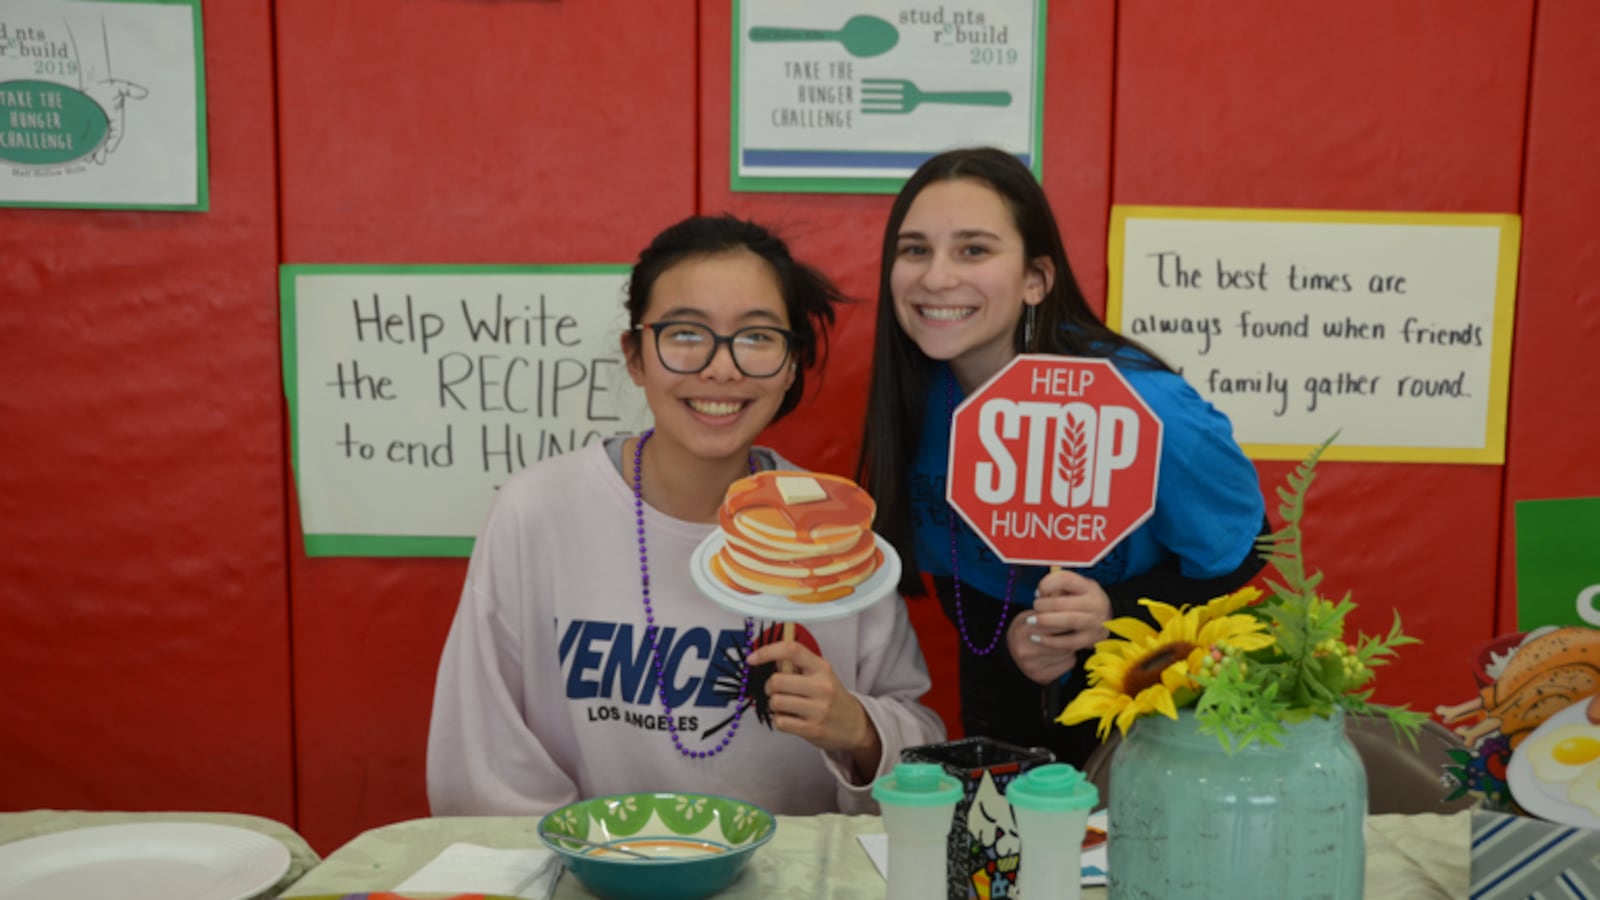 Two students pose at a school event to raise awareness about hunger